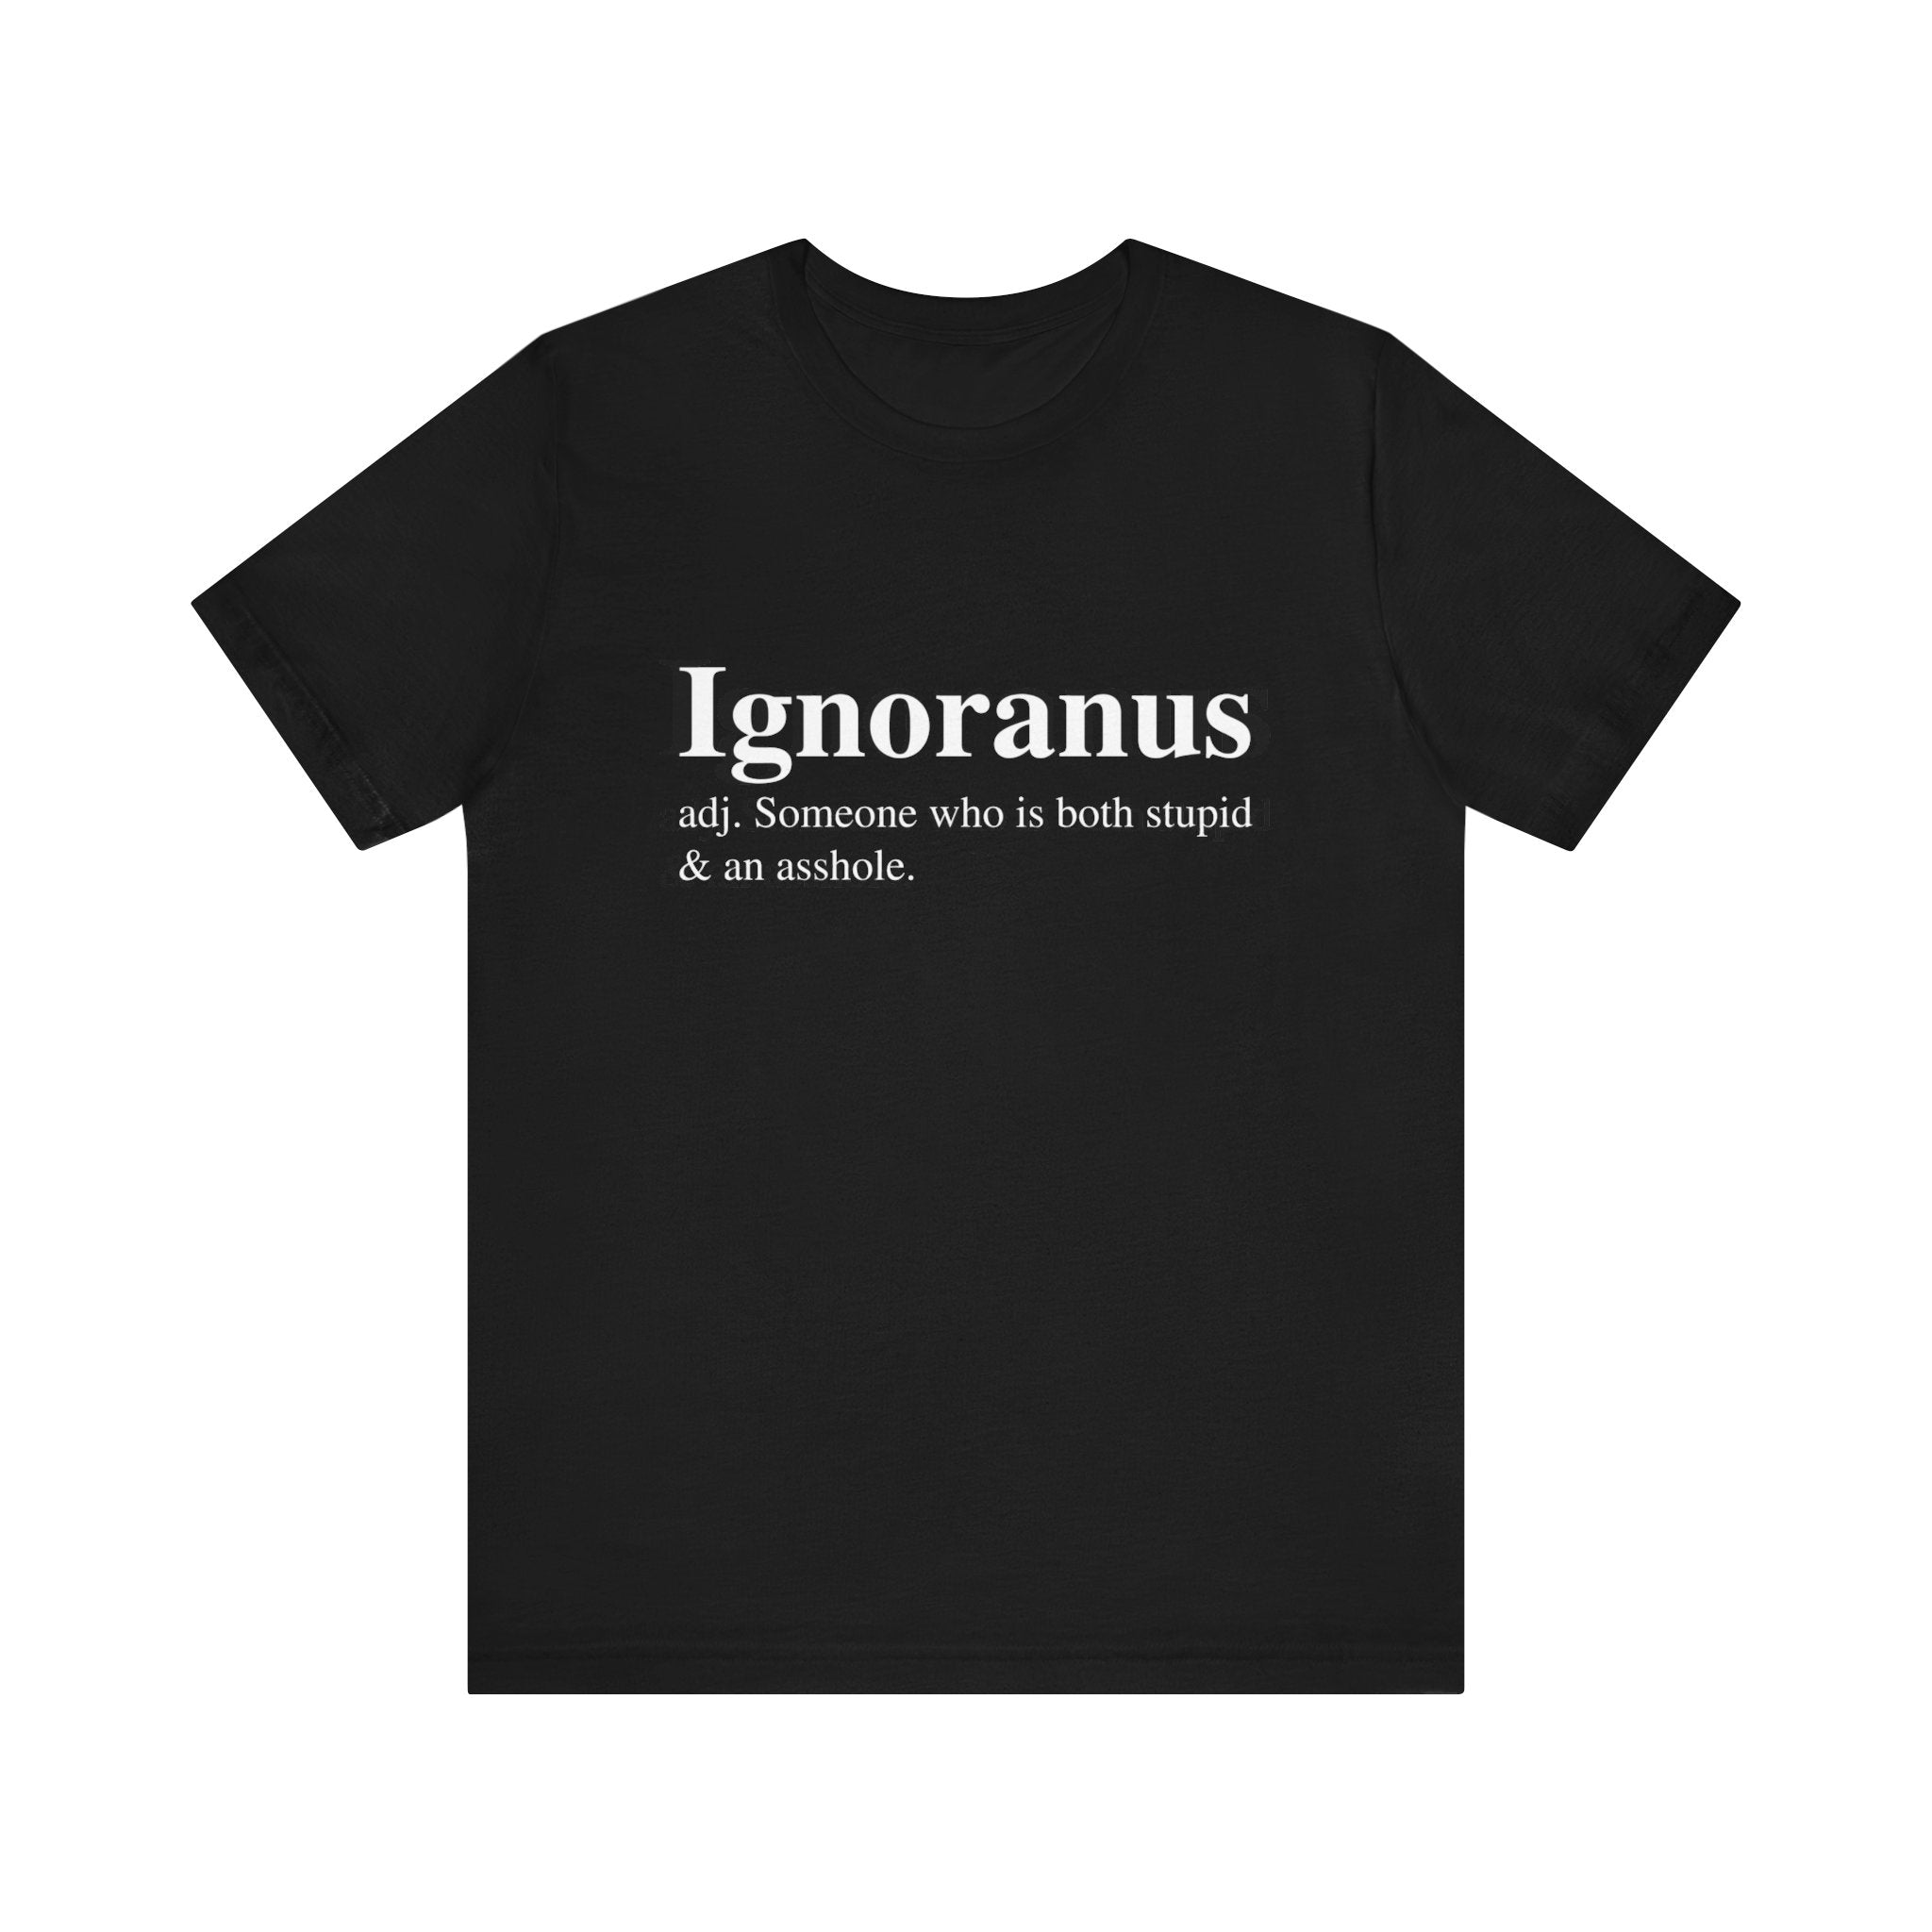 Unisex black Ignoranus T-shirt featuring the word "Ignoranus" in white text, defined as "someone who is both stupid & an asshole," crafted from soft cotton.